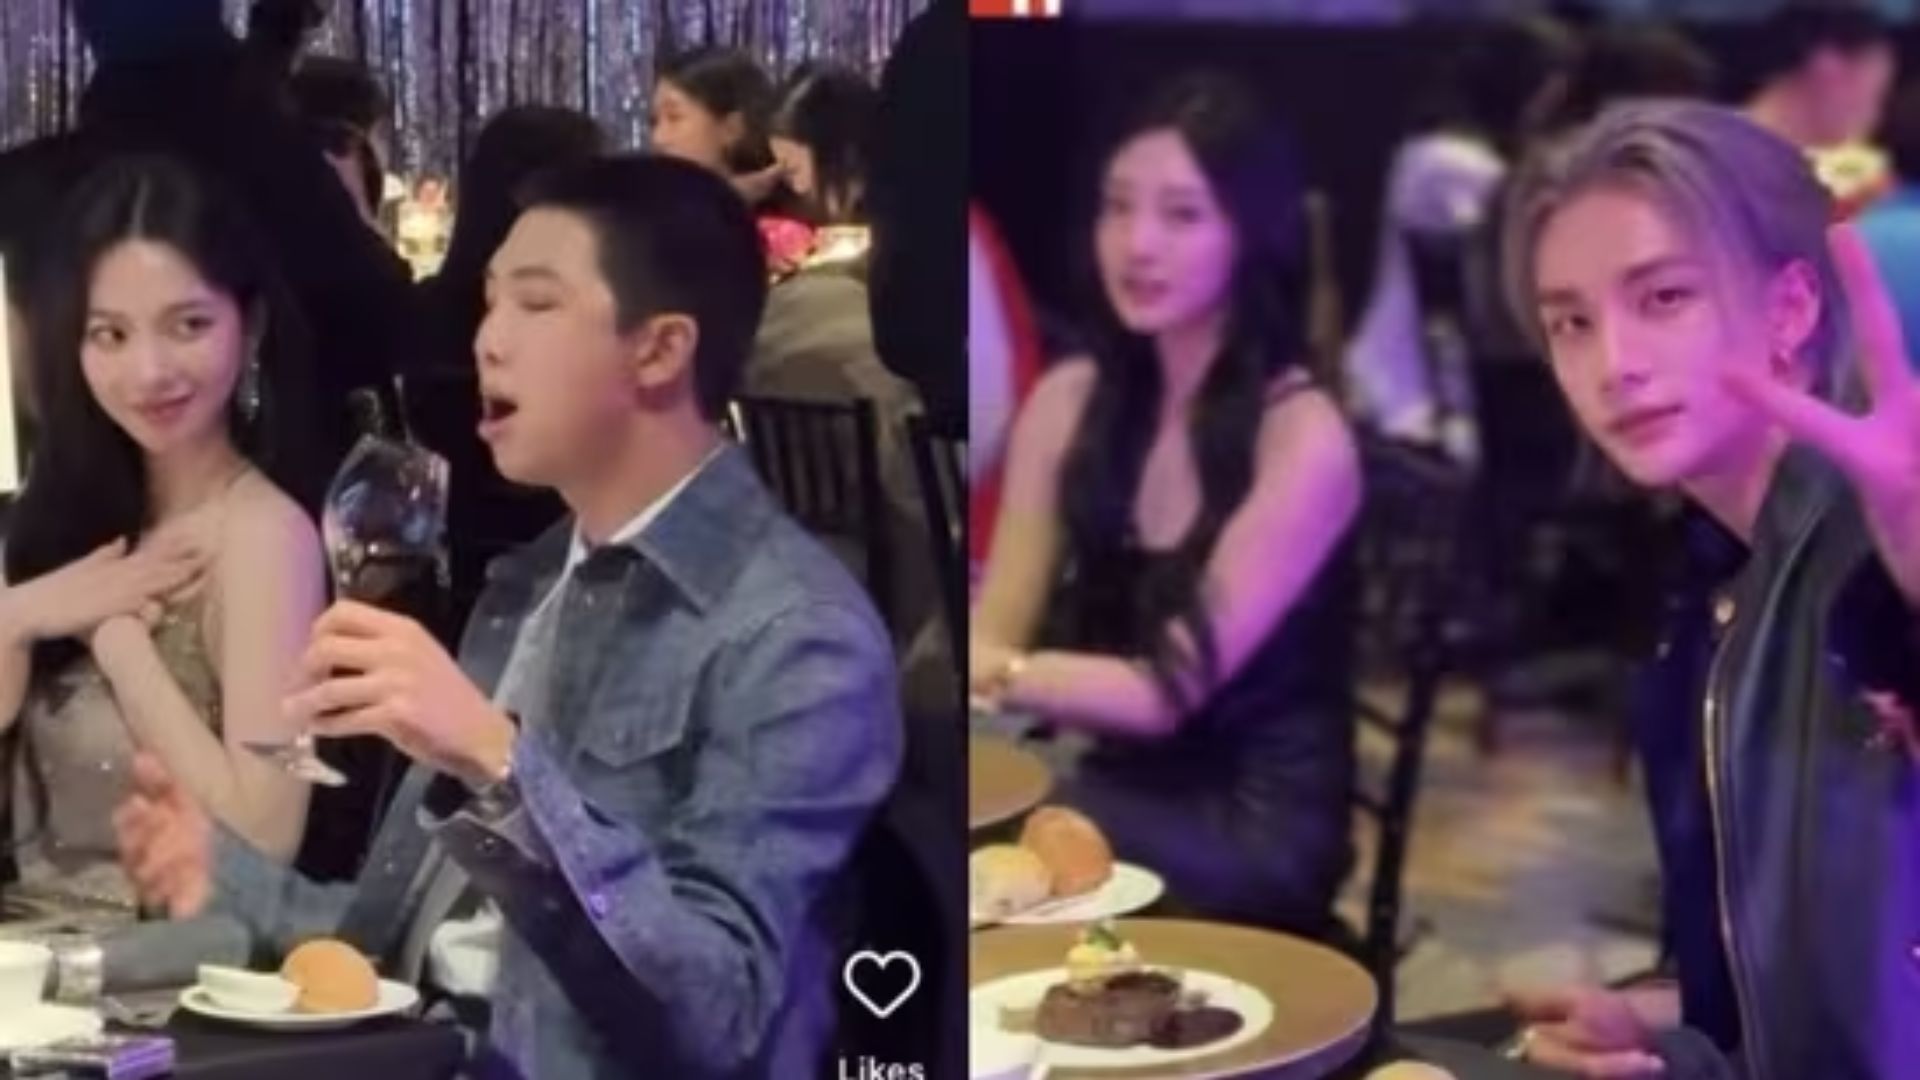 BTS' RM and aespa's Karina to TXT's Yeonjun and Blackpink's Jennie, watch K-pop idols pair up at Love Your W Event